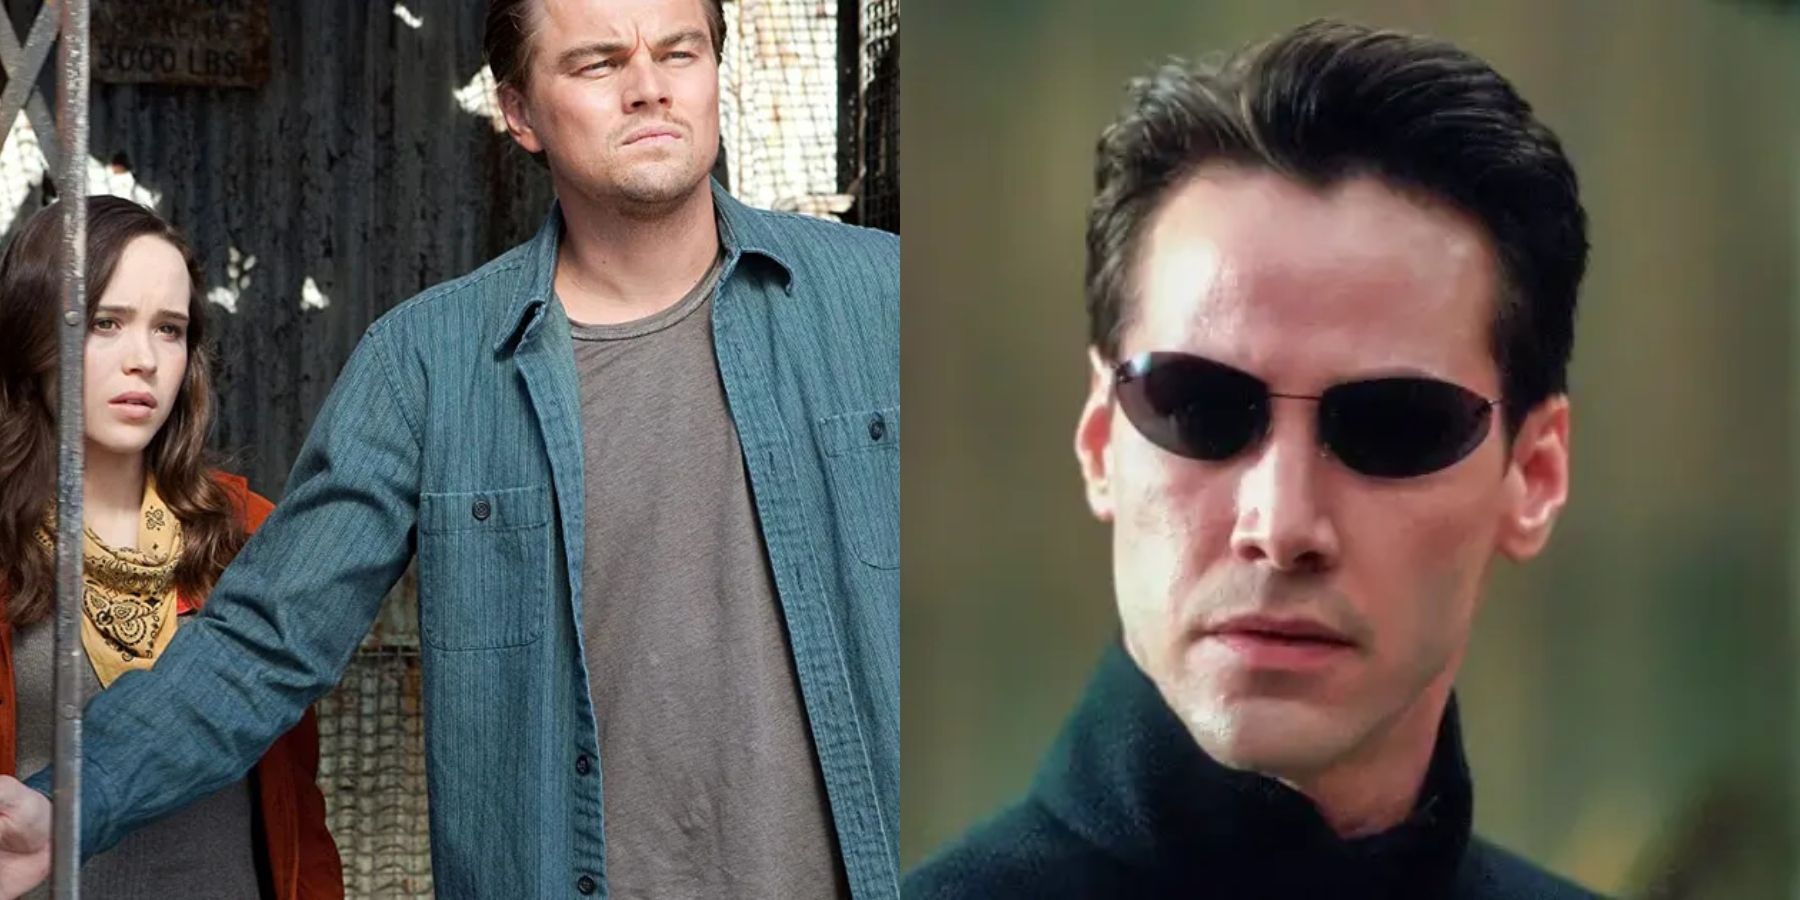 Split image of Elliot Page and Leonardo DiCaprio in Inception and Keanu Reeves in The Matrix